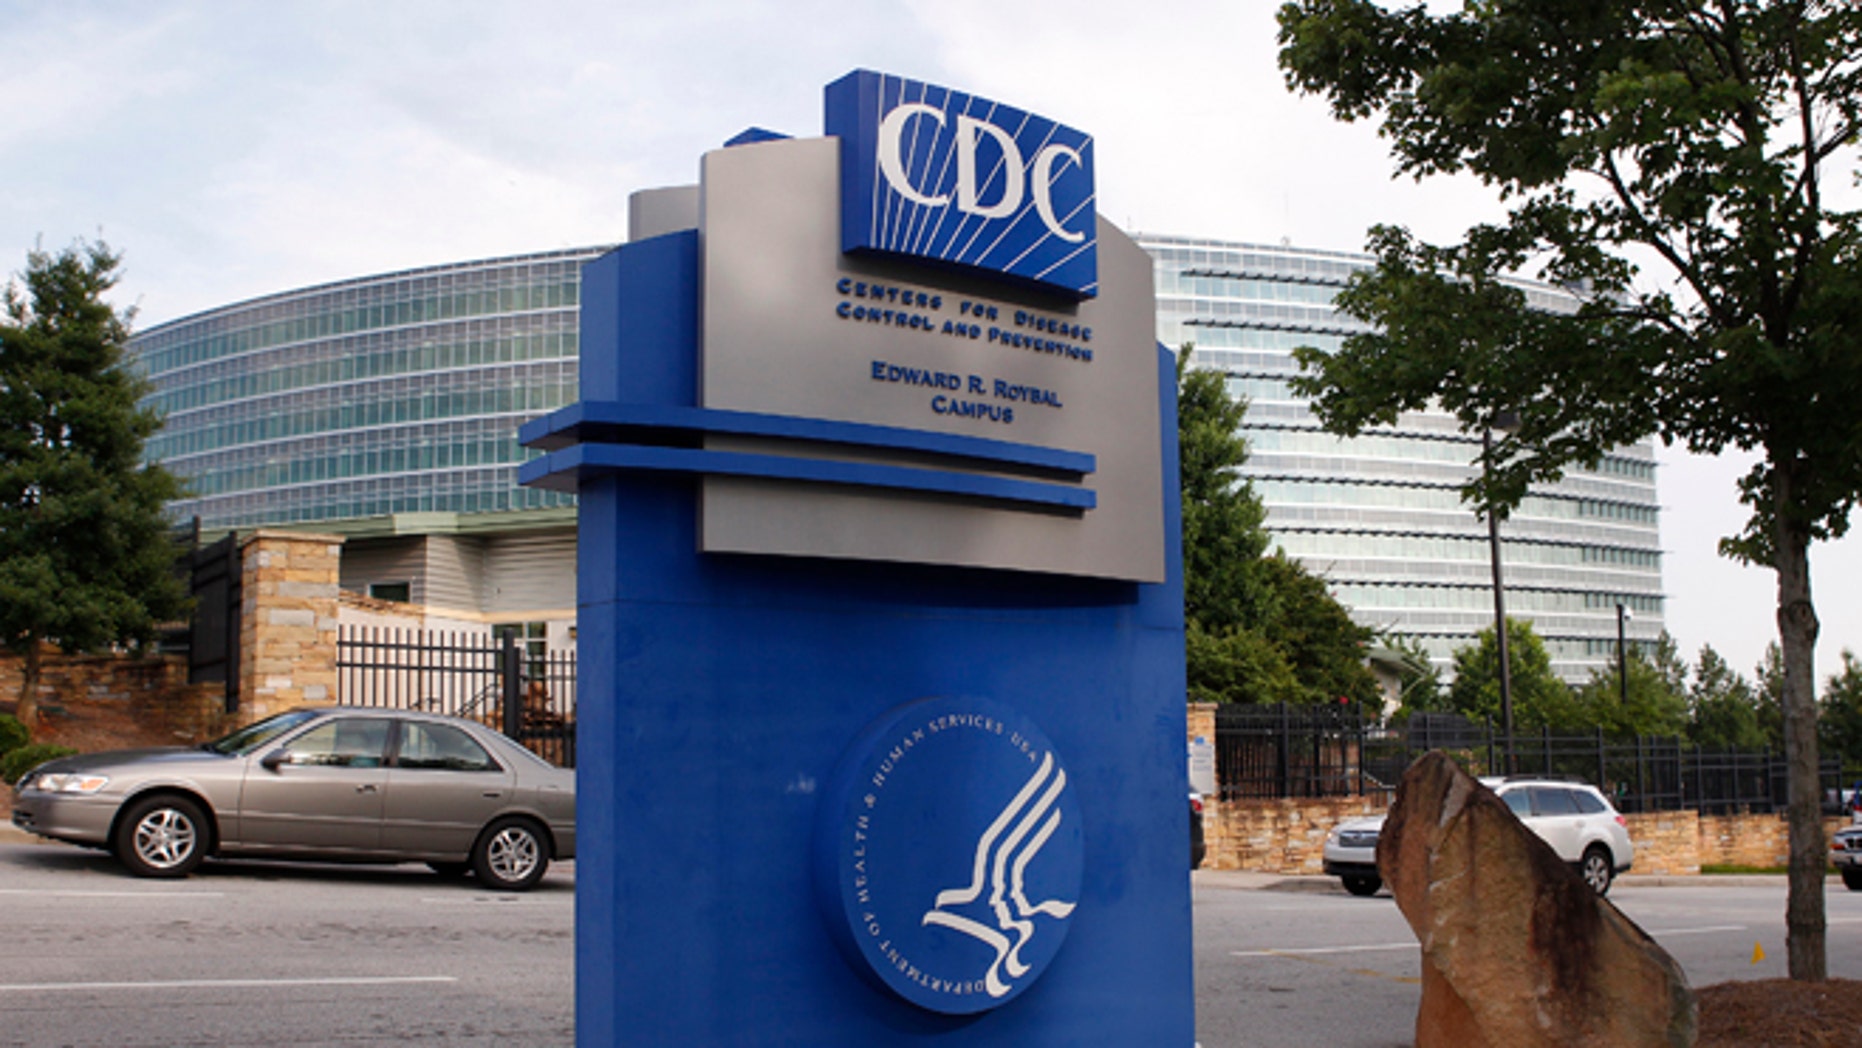 cdc-lab-inspectors-may-have-risked-public-safety-documents-fox-news